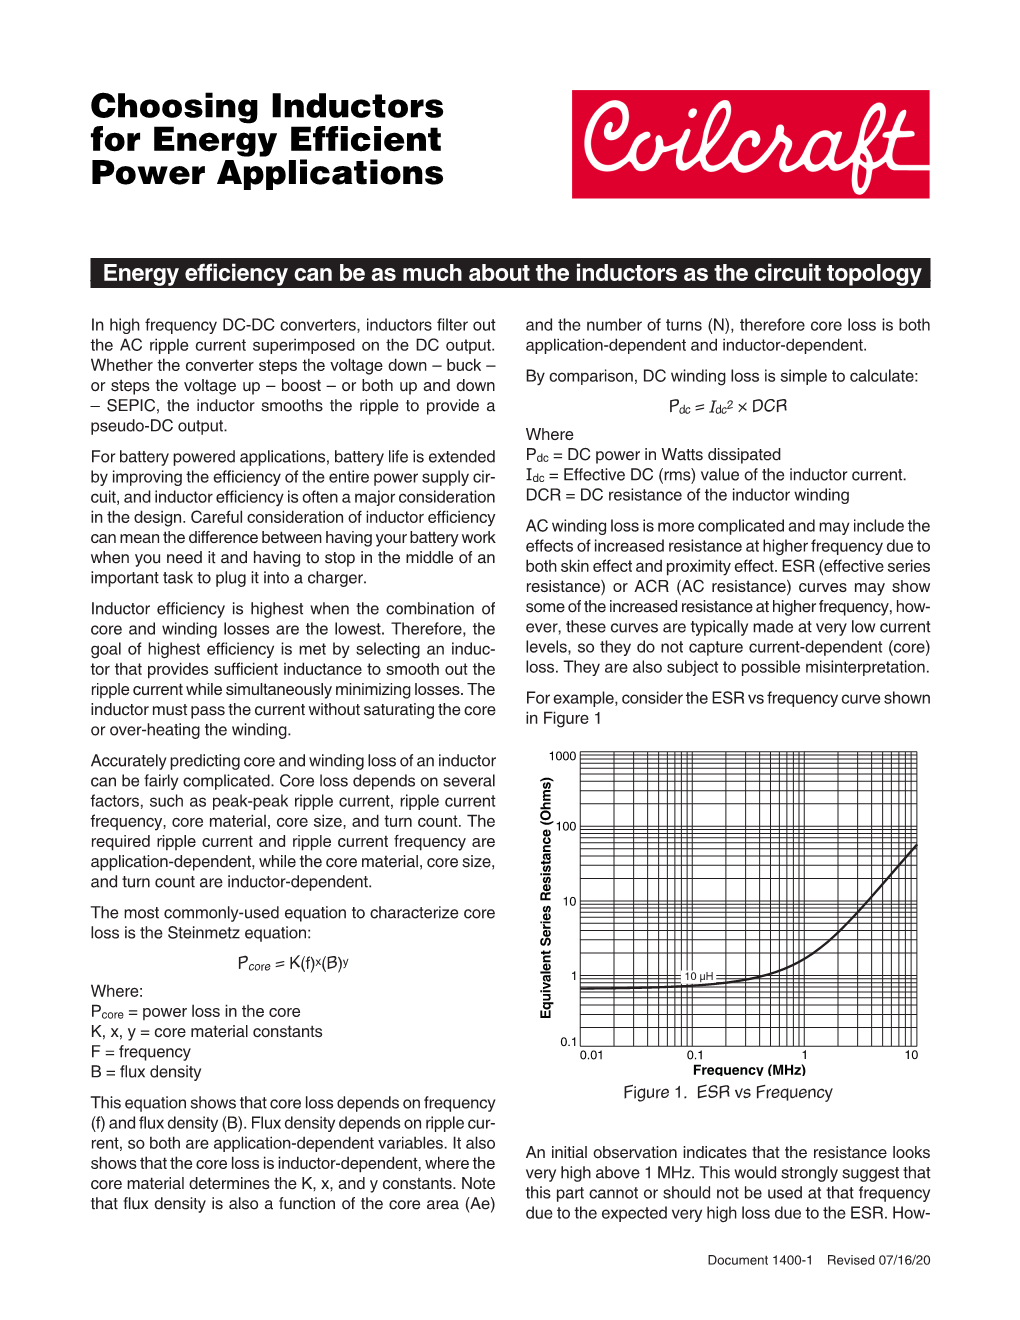 Choosing Inductors for Energy Efficient Power Applications